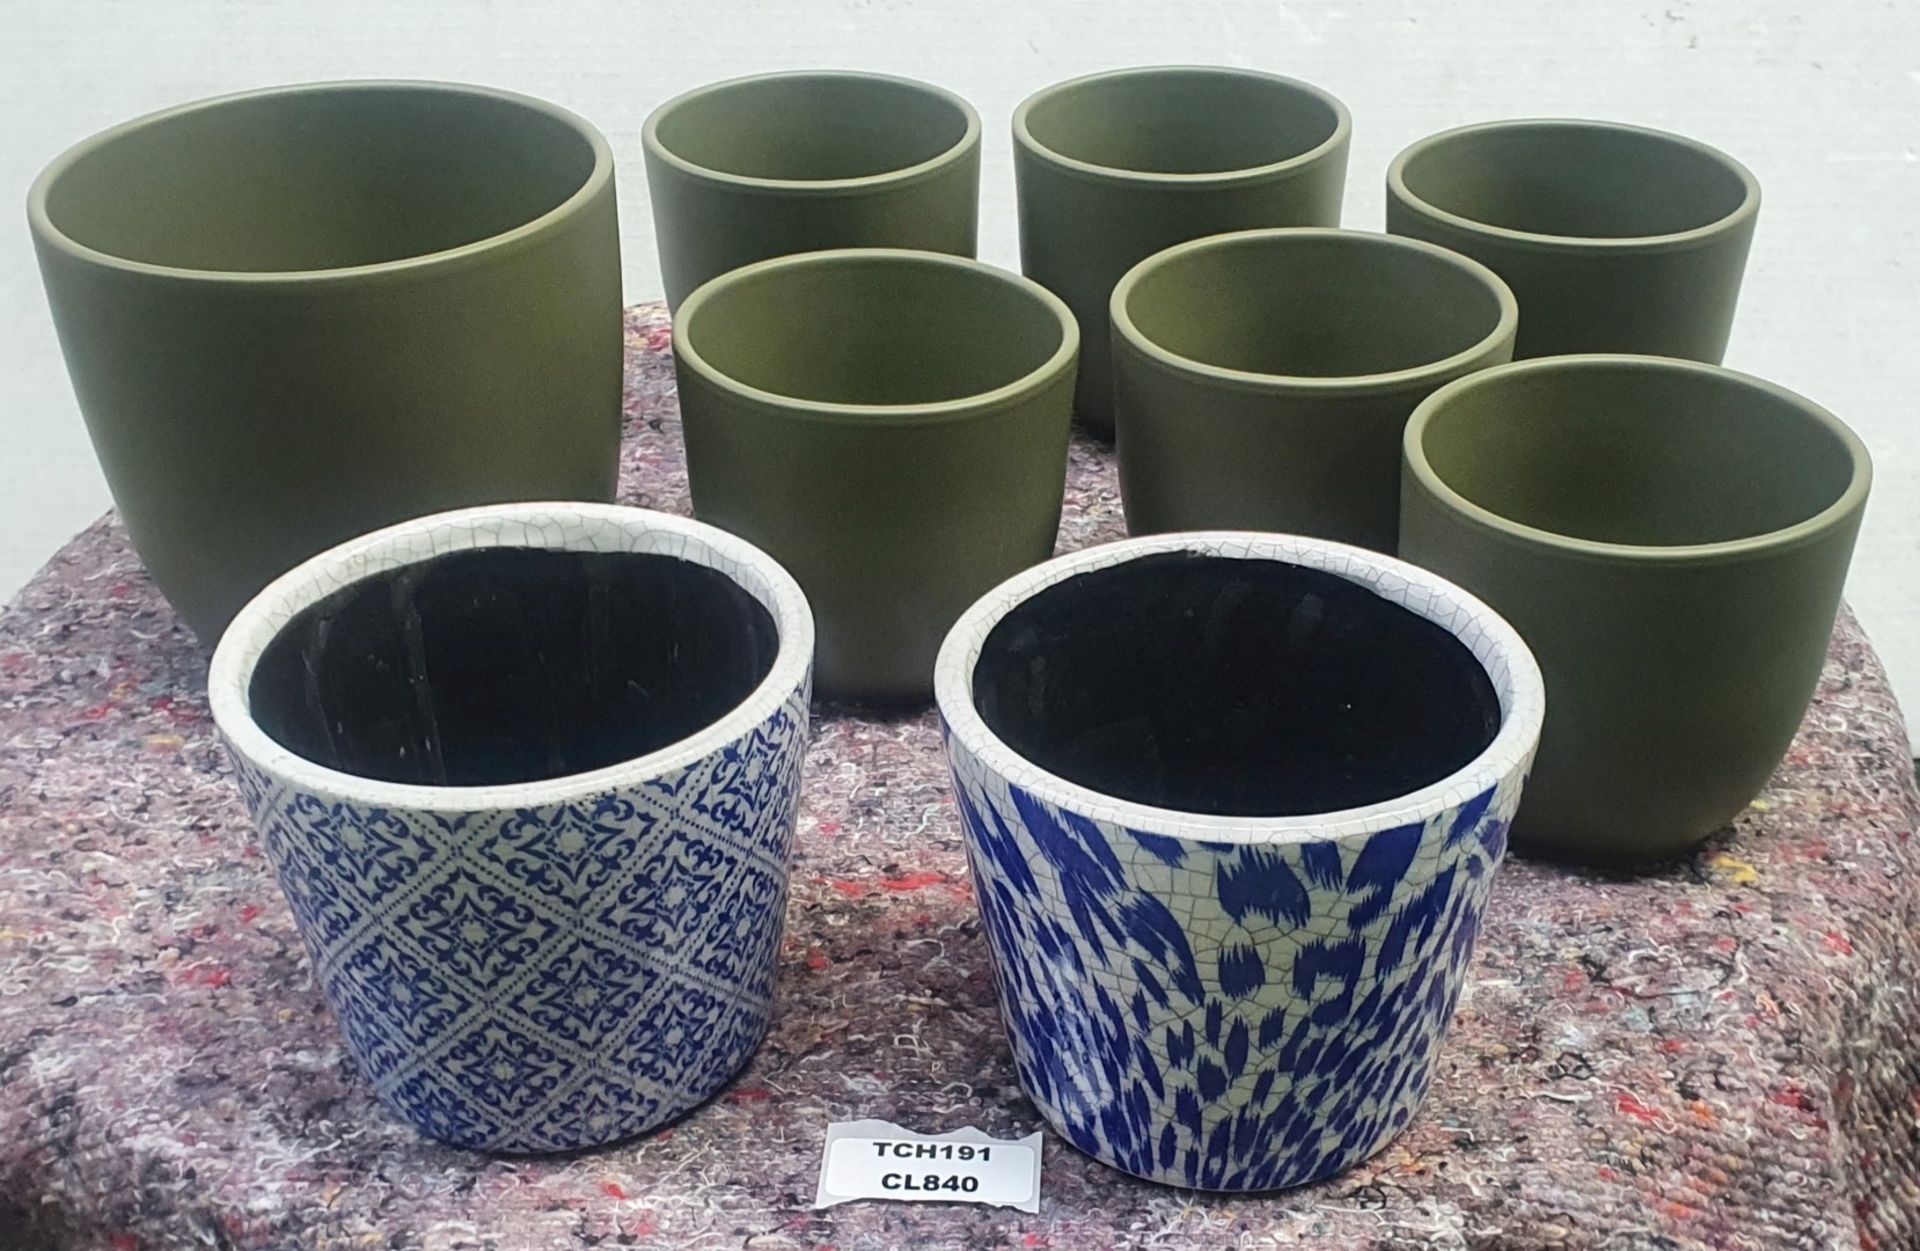 9 x Assorted Plant Pots Including - Includes Vintage and Contemporary Styles - New Stock - Ref: - Image 11 of 11